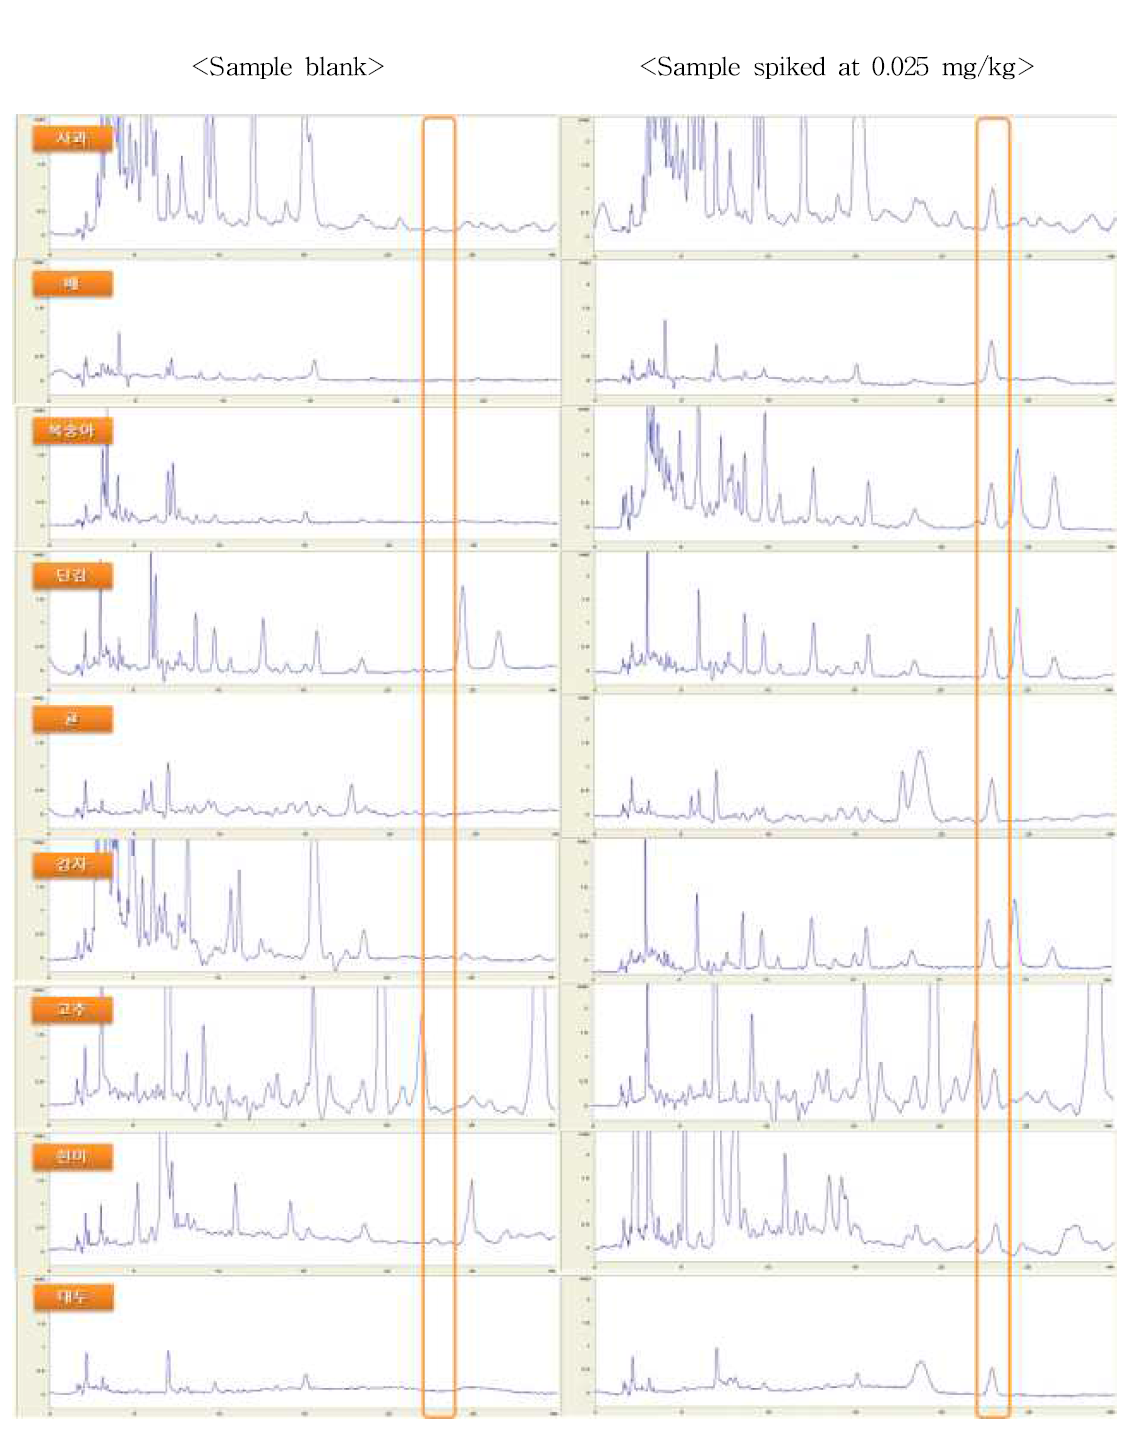 Chromatogram of sample extracts obtained by sample preparation and HPLC/UVD analysis at 0.025 mg/kg spiking leve